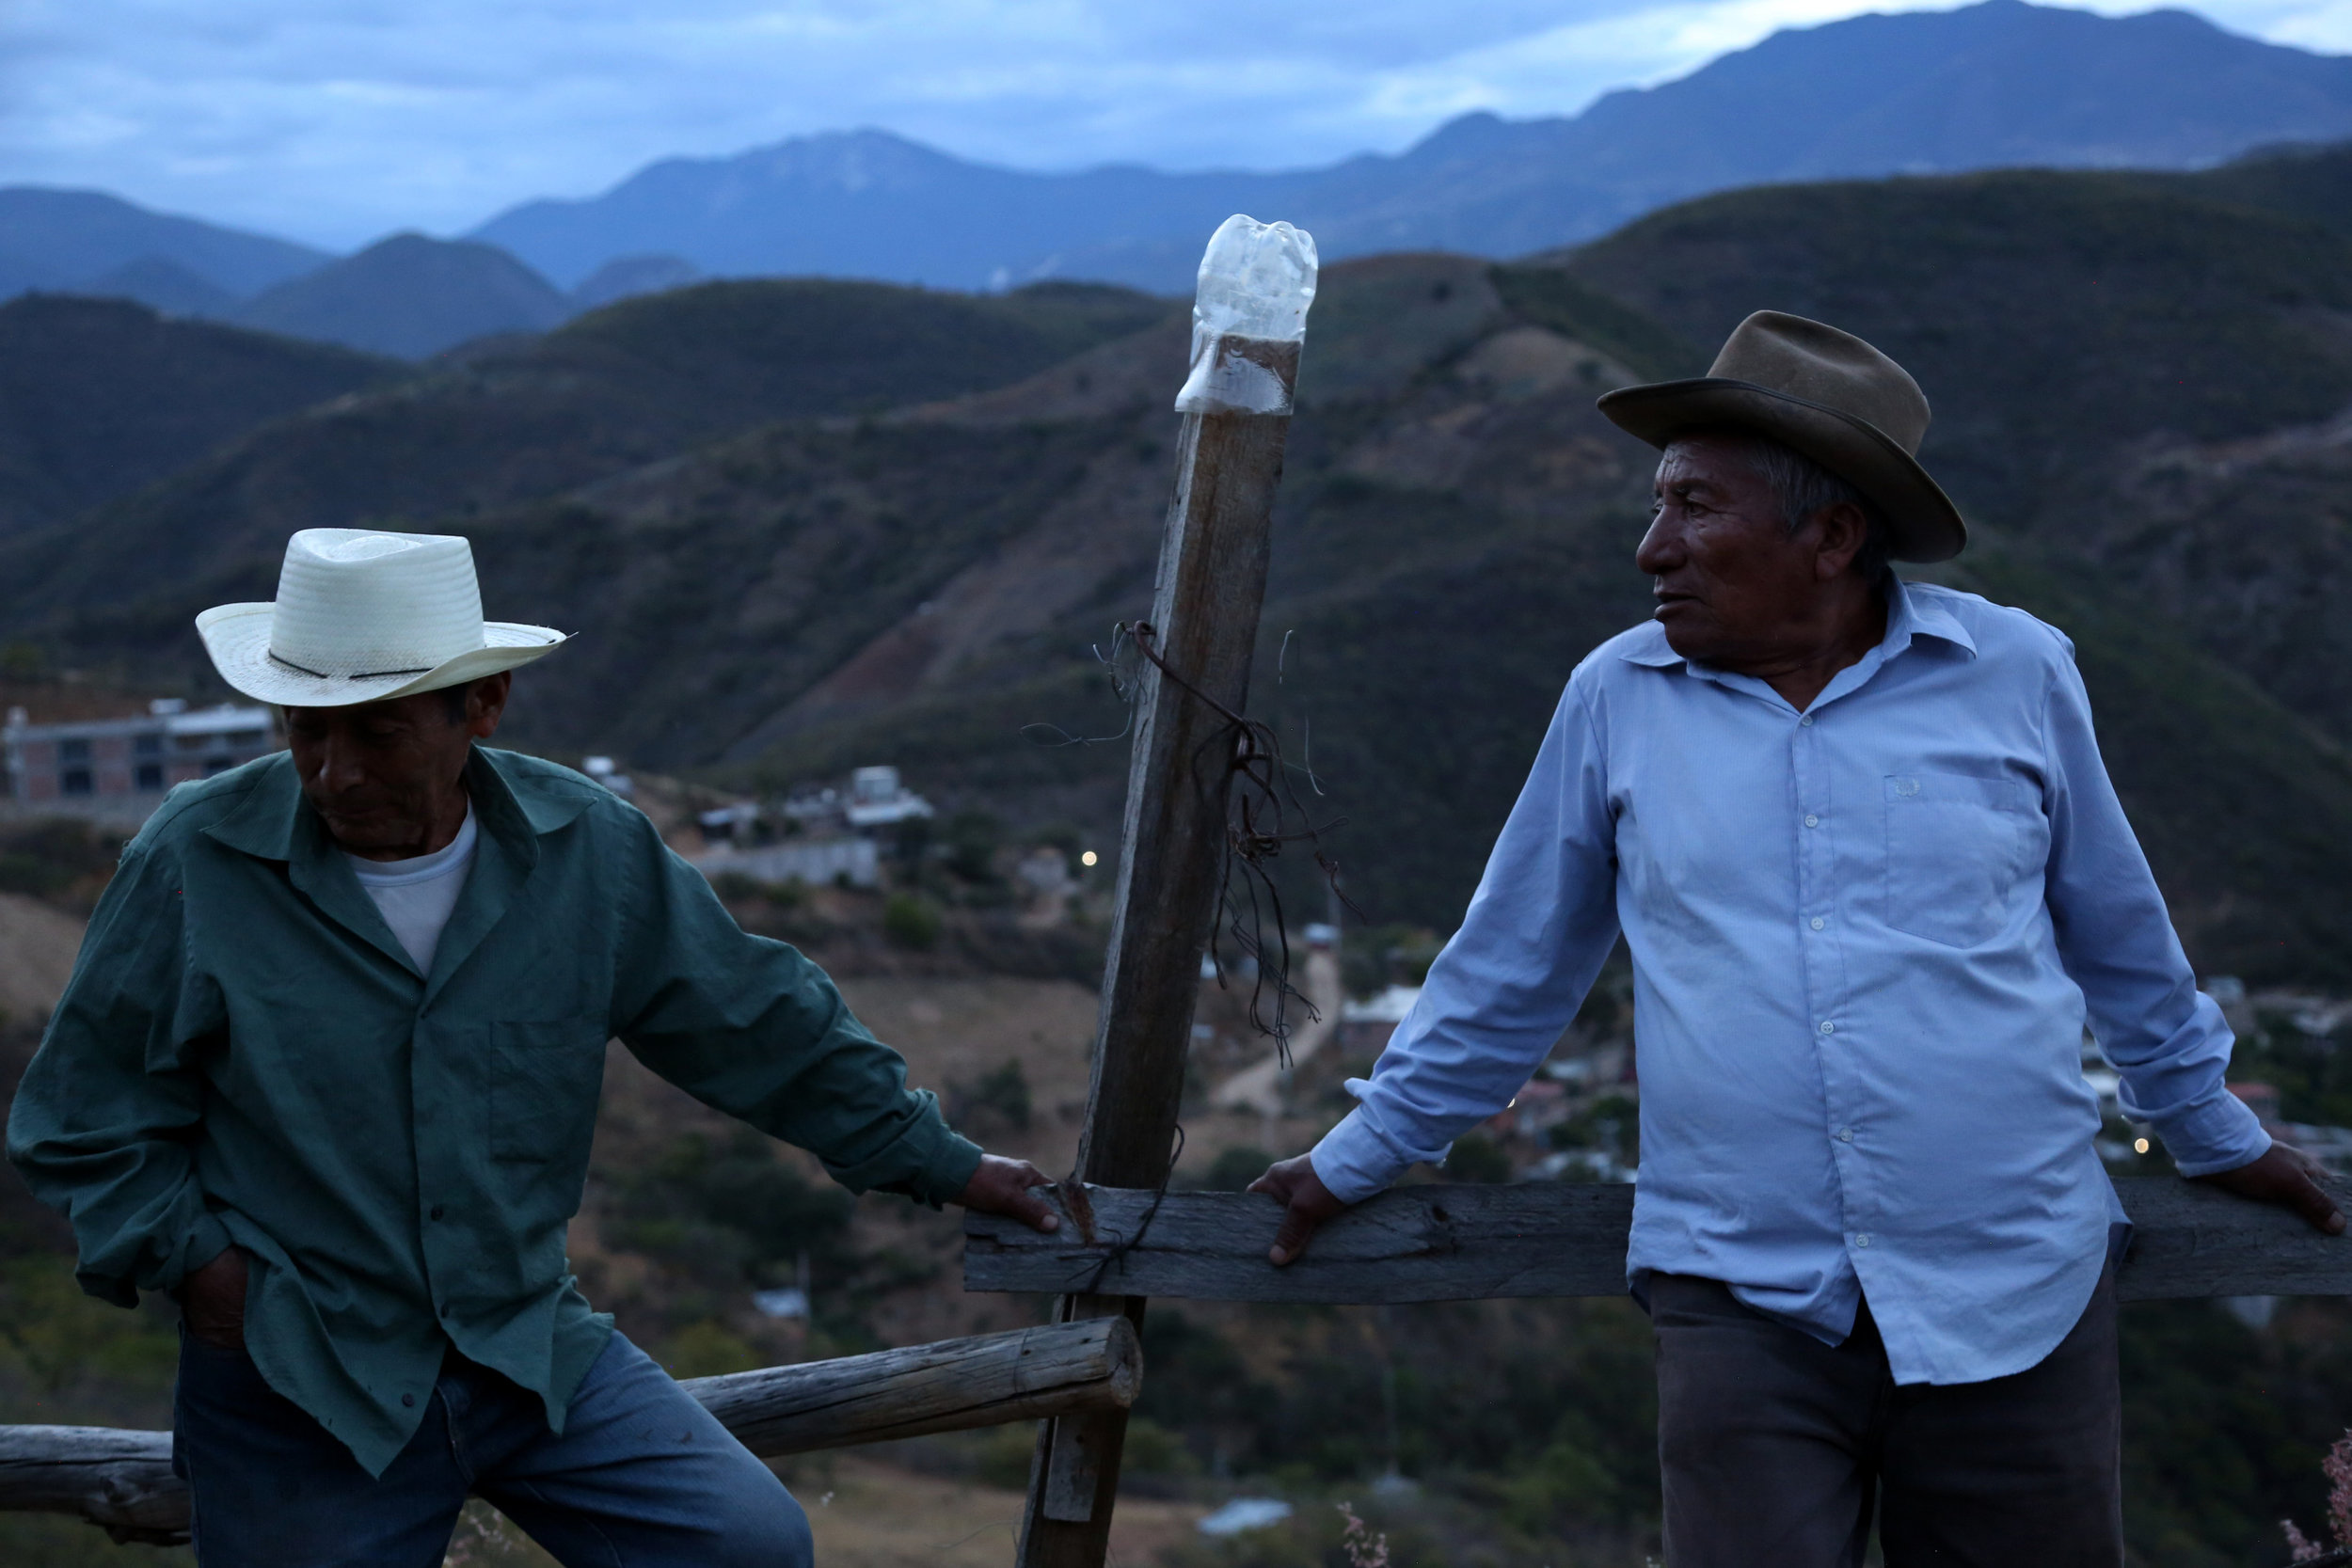  Arnulfo de los Angeles and Rodolfo Hernandez sit at the palenque that they share with Fortunate Angeles in  San Juan del Rio, Oaxaca.  